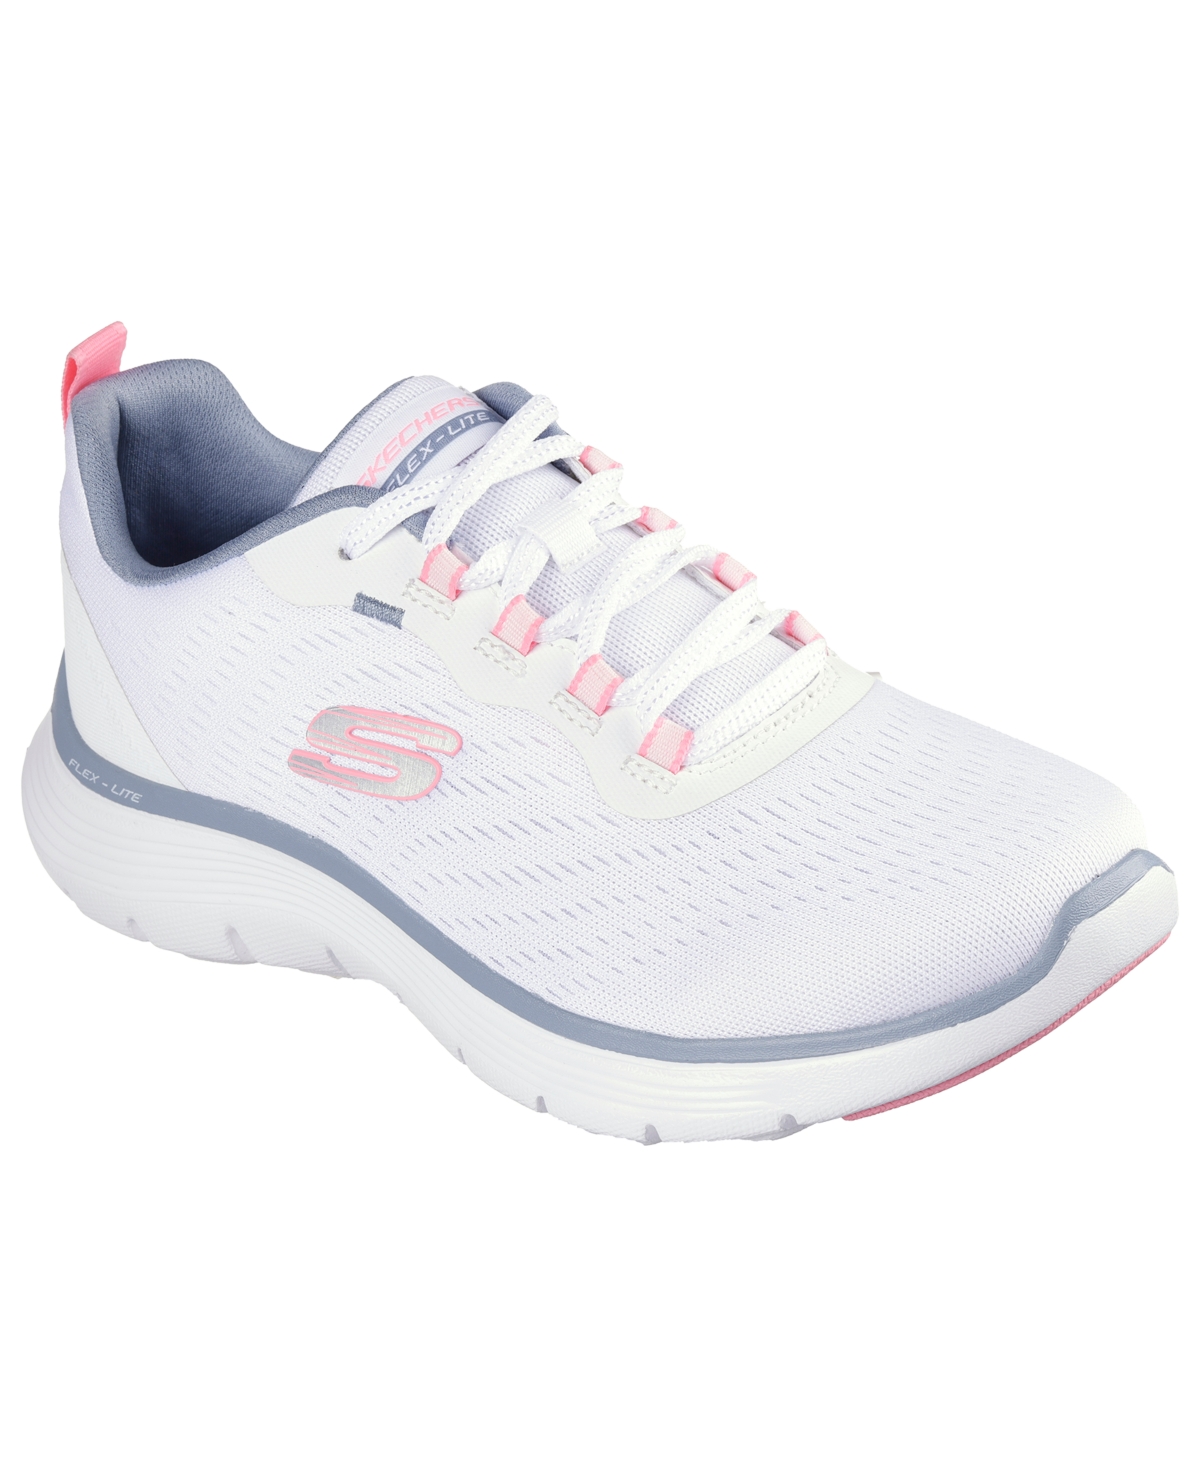 Women's Flex Appeal 5.0 Walking and Training Sneakers from Finish Line - White/Pink